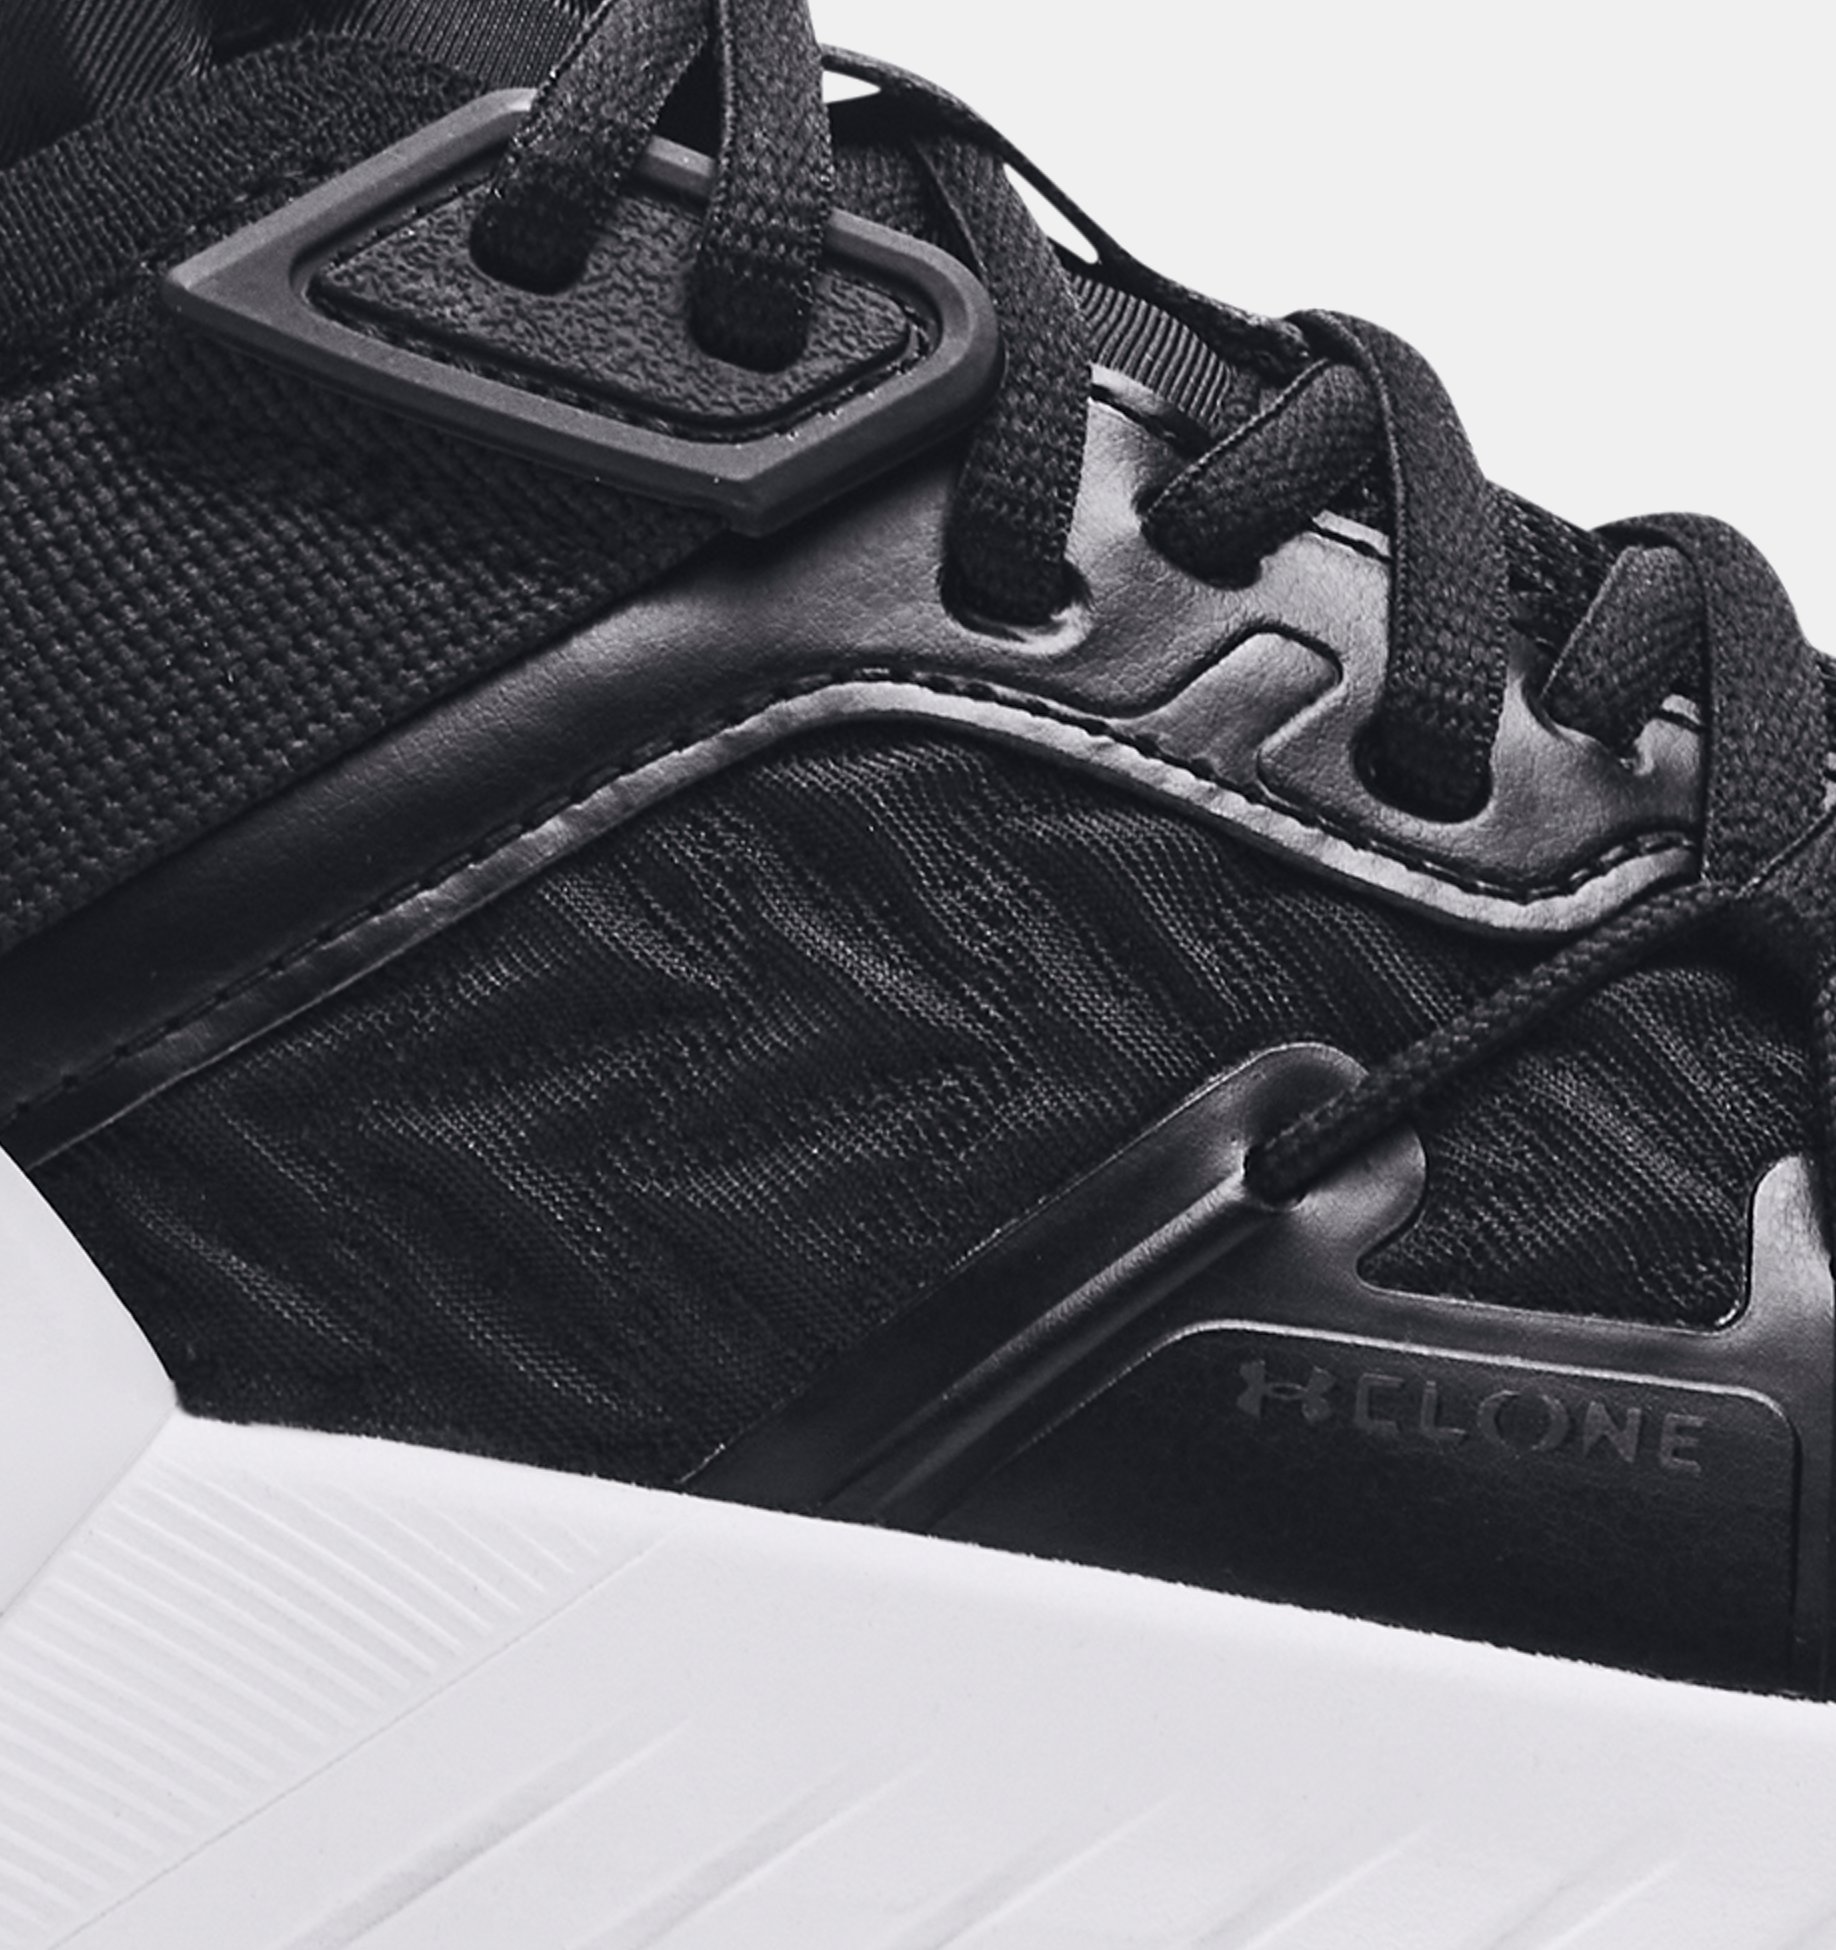 Under Armour and Dwayne Johnson Release New Project Rock 2